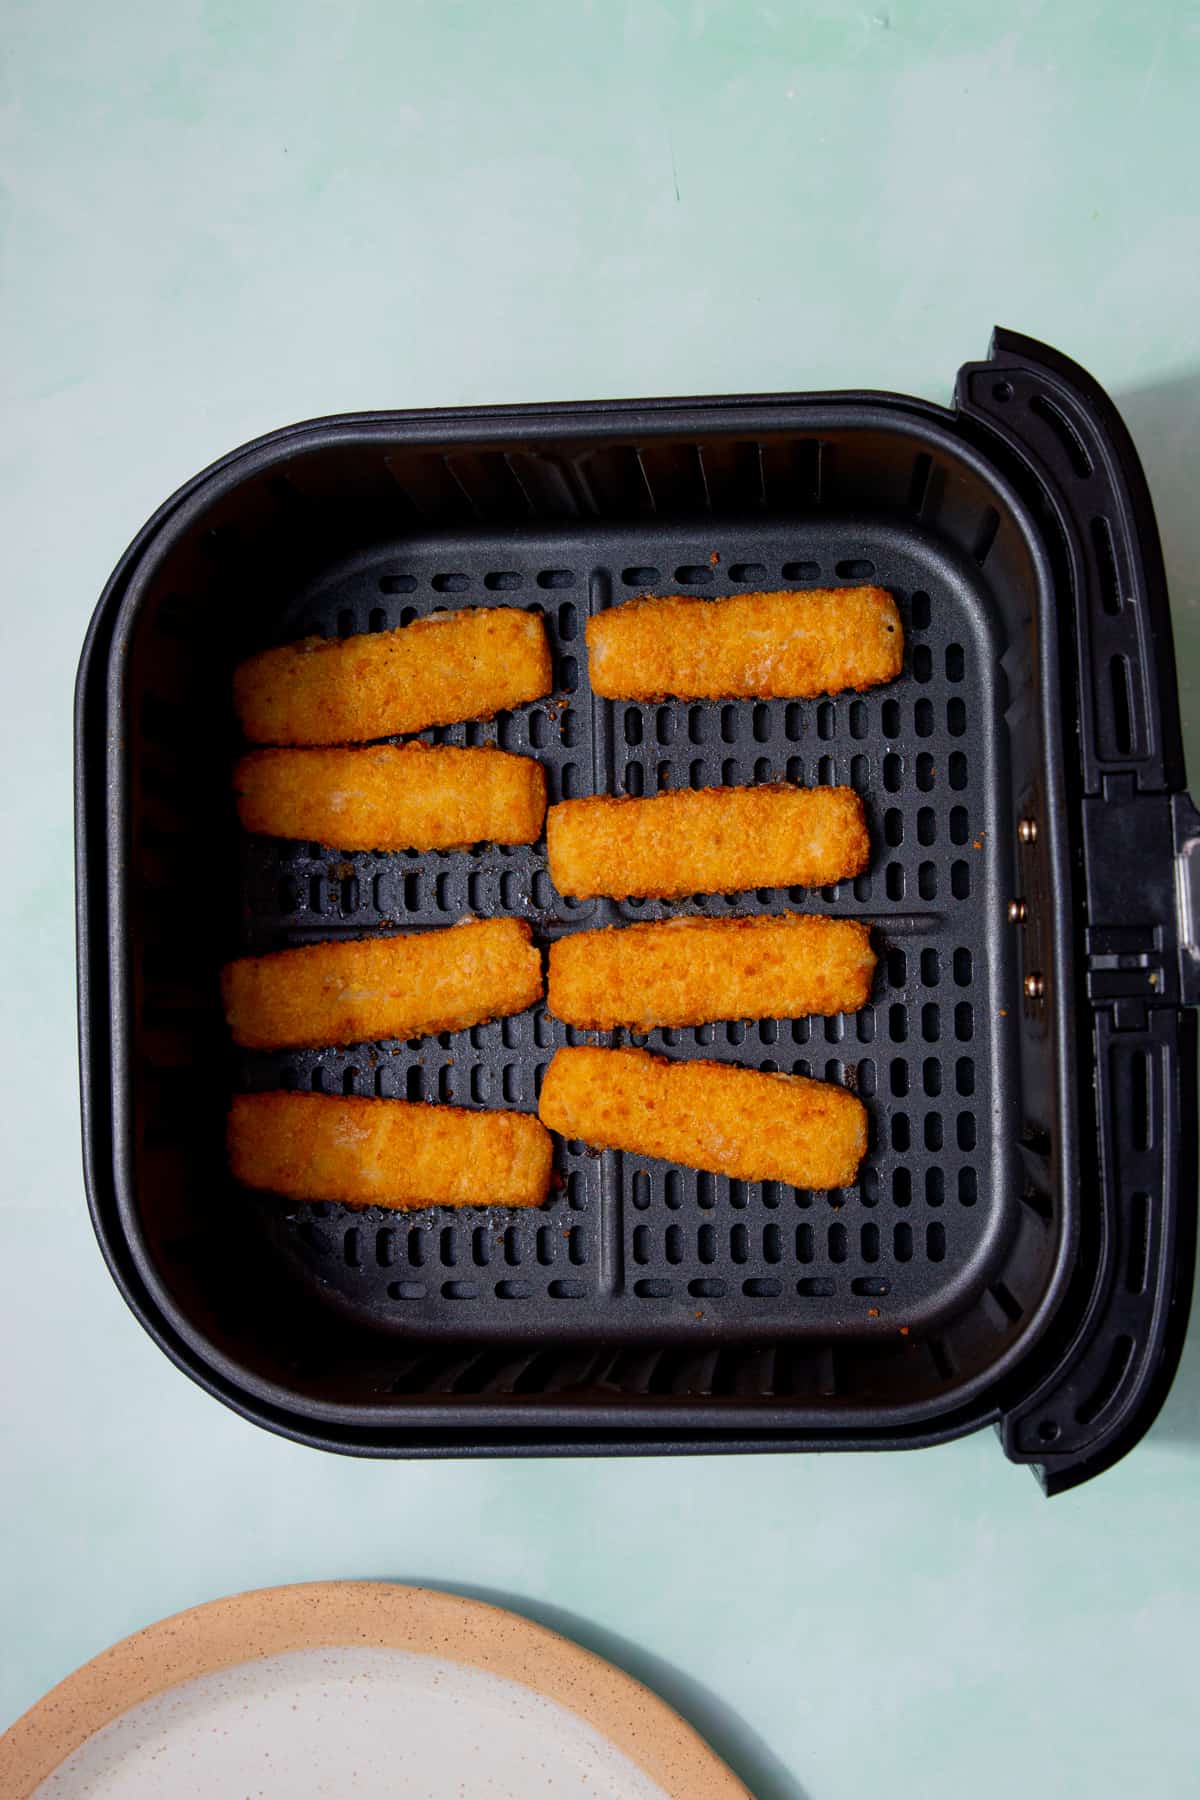 8 battered fish fingers in the airfryer tray.